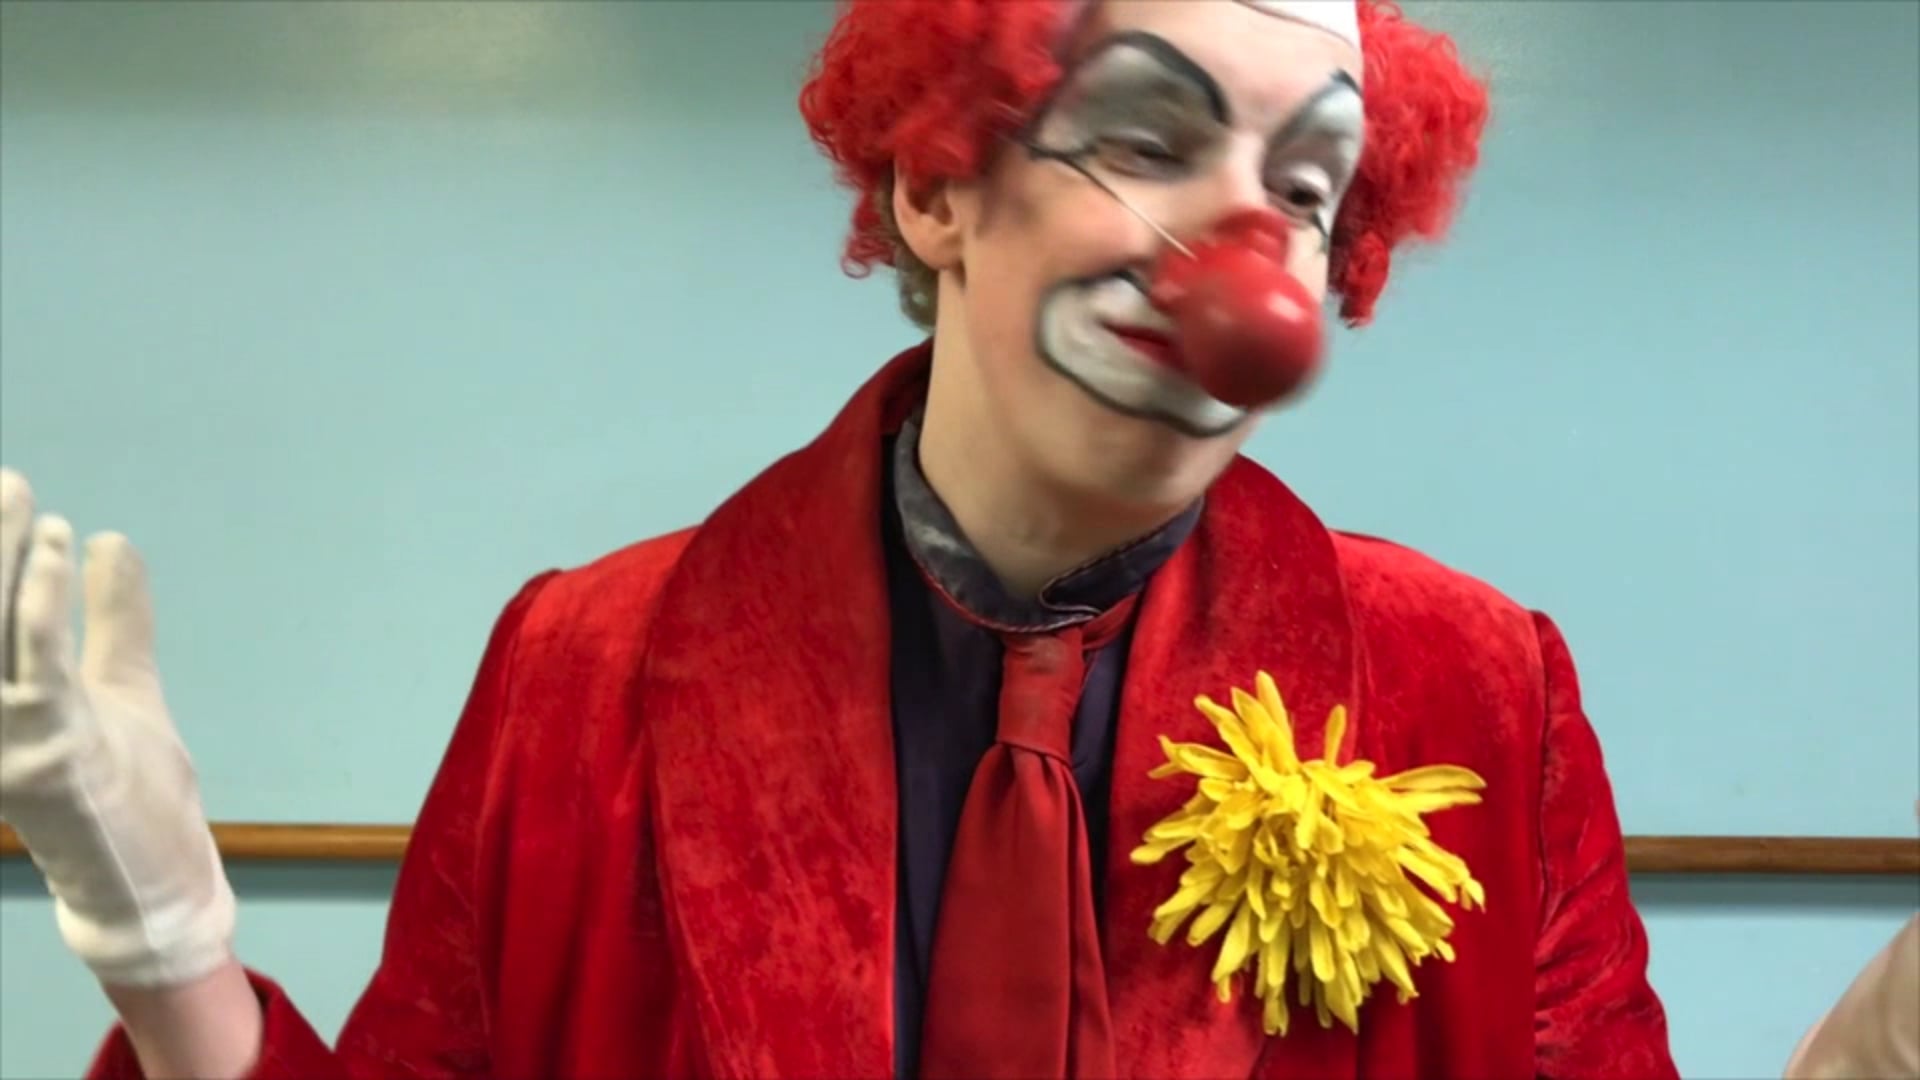 Promotional video thumbnail 1 for Adolf Mulgrew - Adult Clown